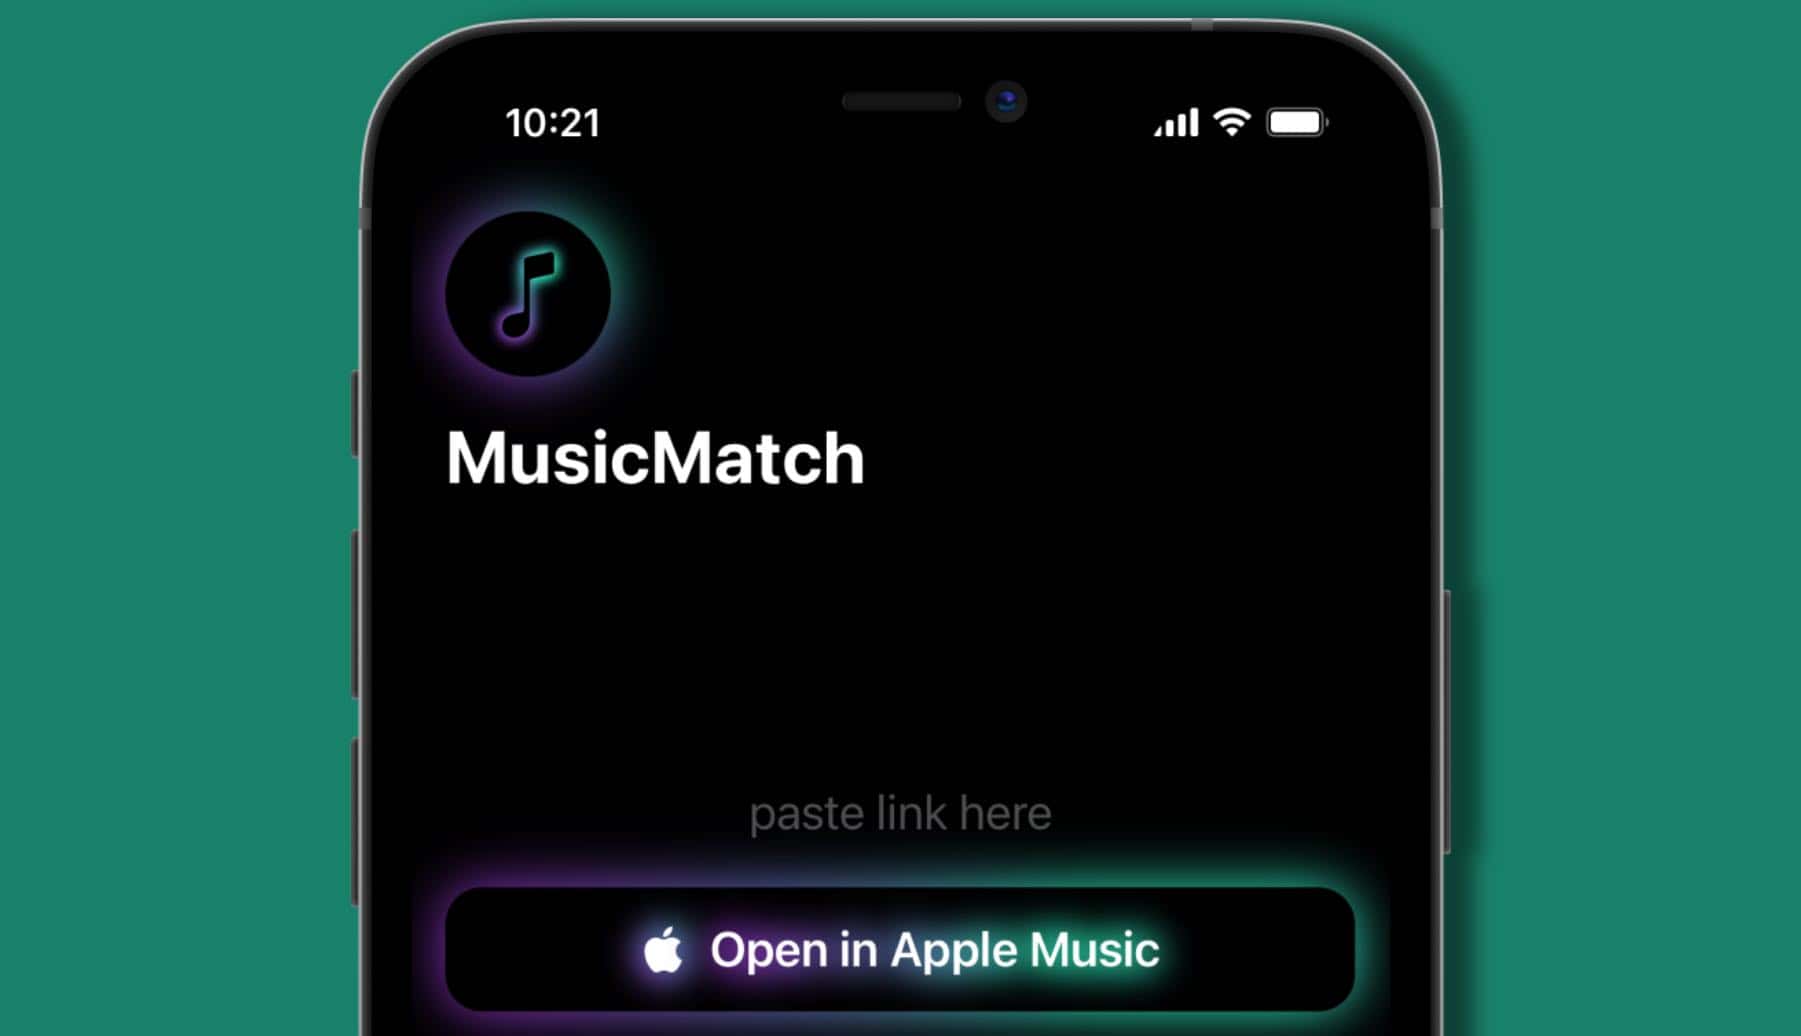 New App ‘MusicMatch’ Can Open URLs in Spotify and Apple Music